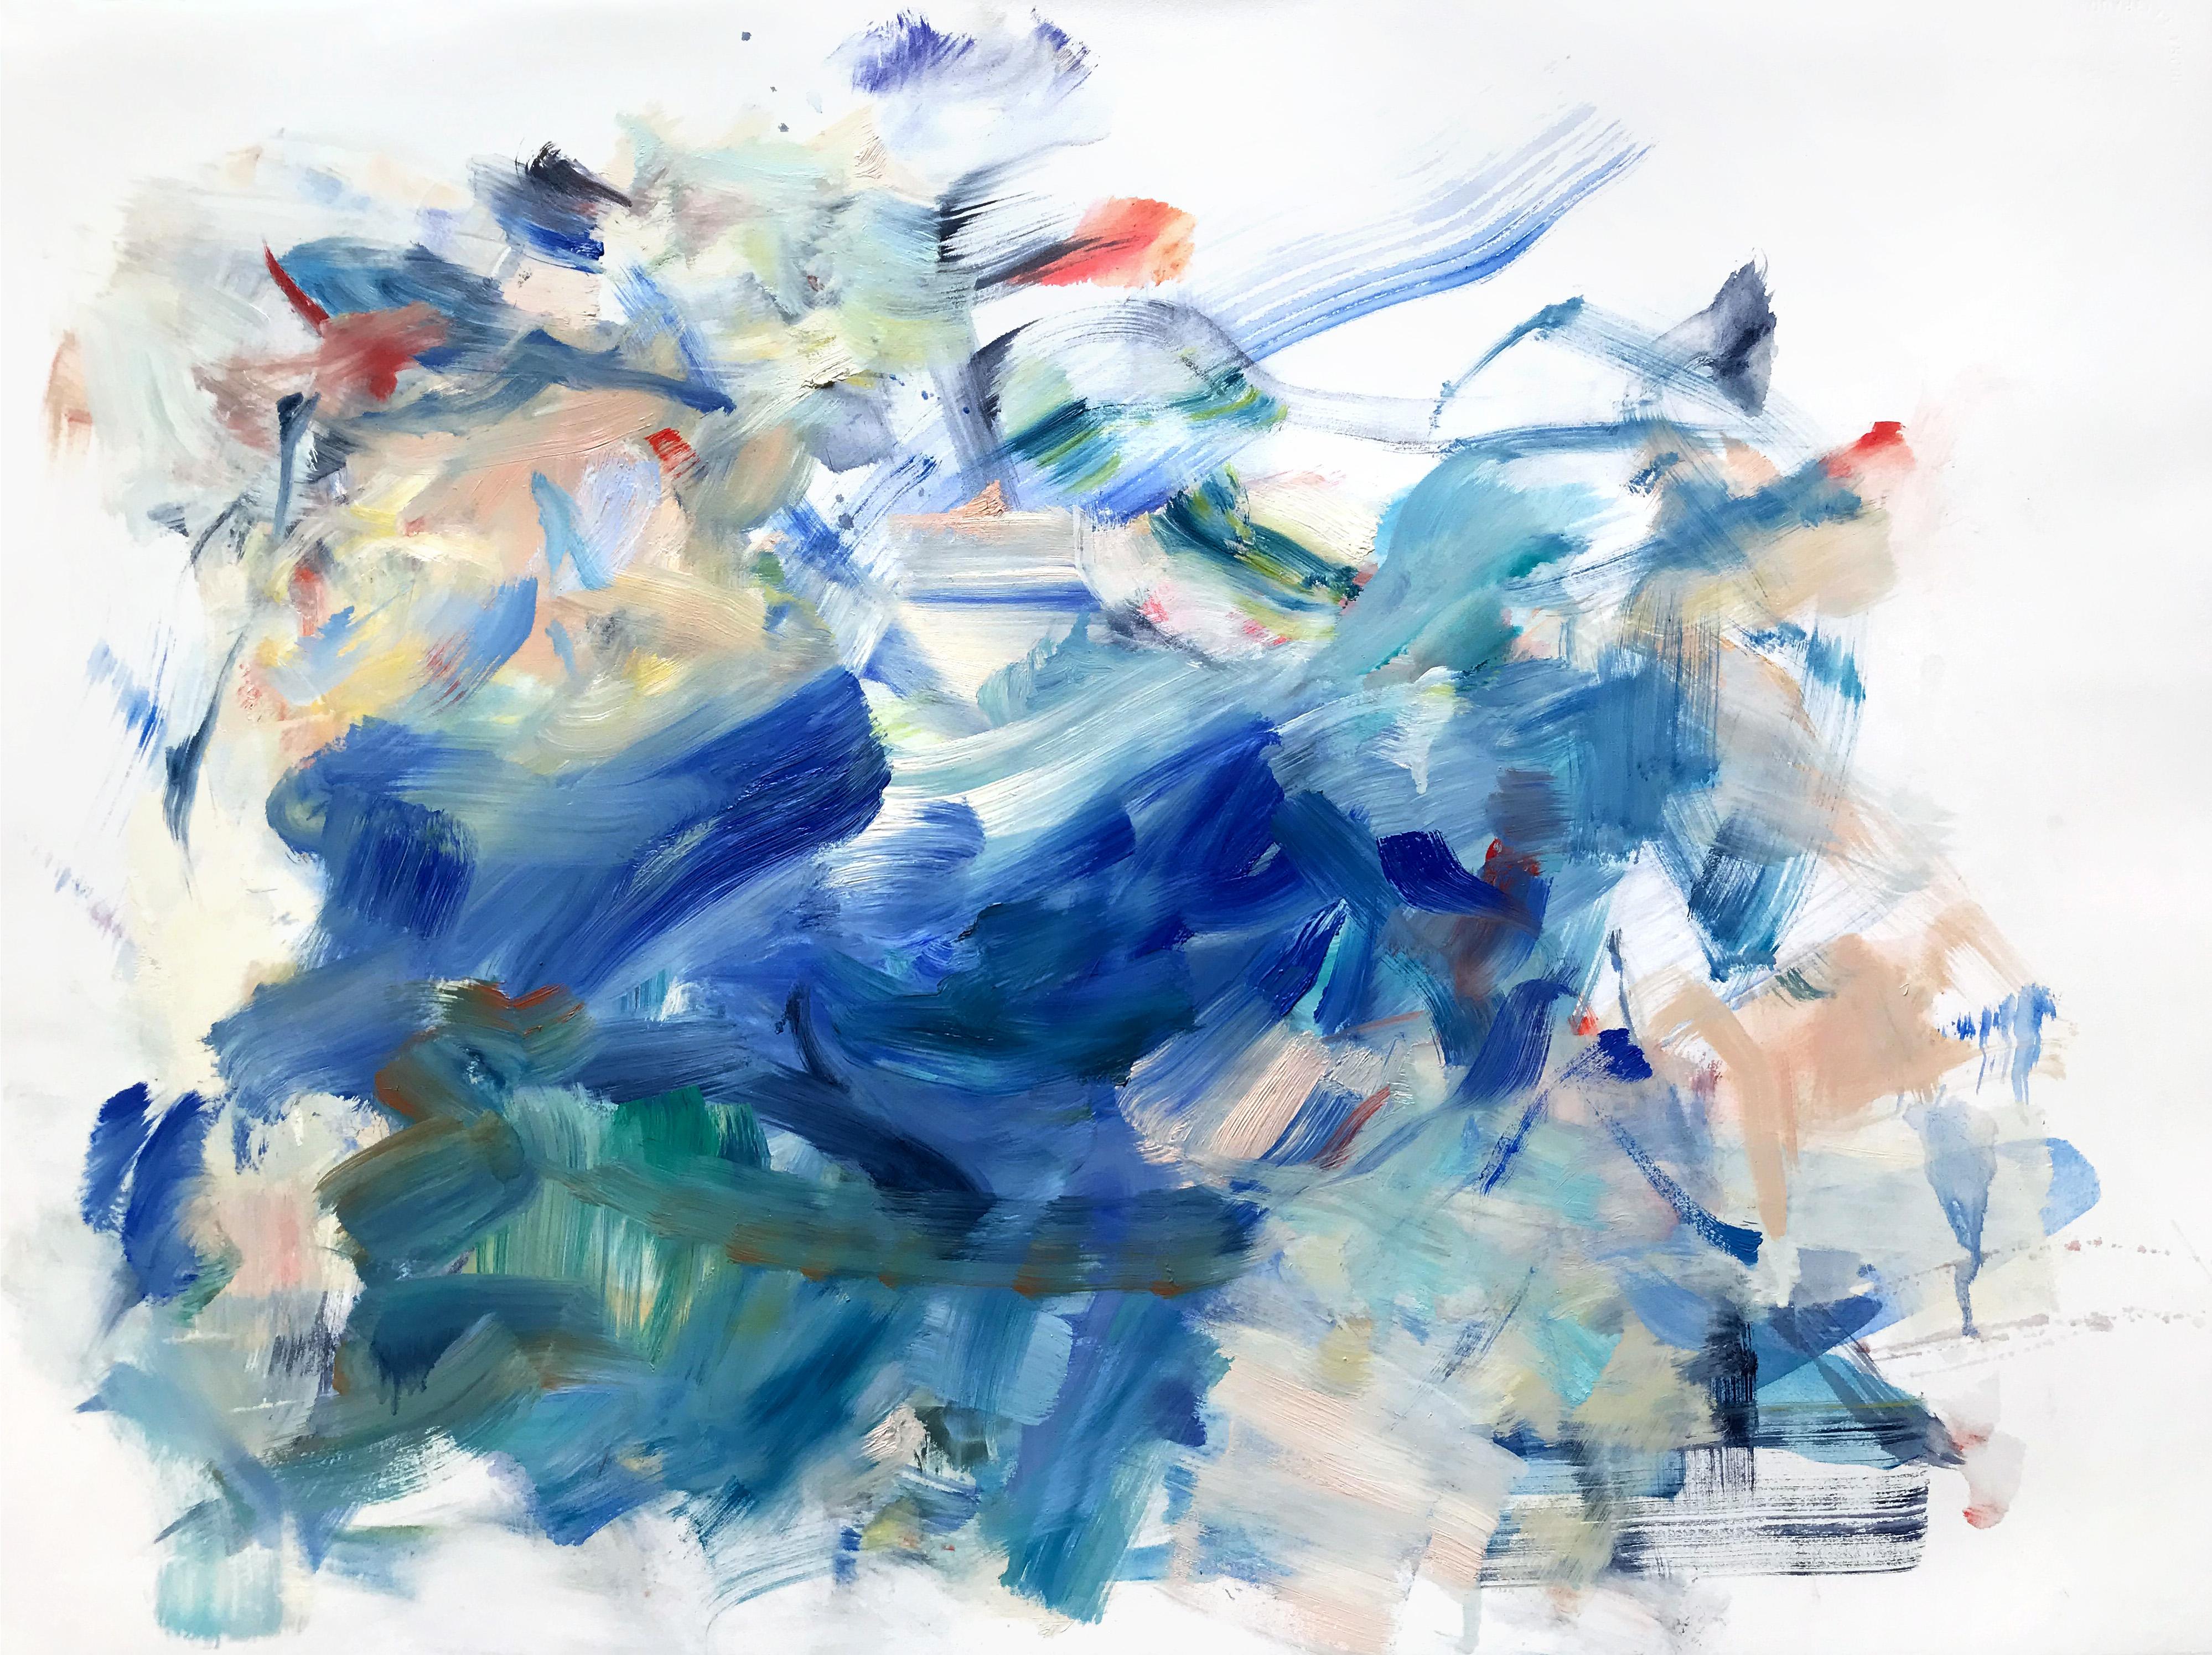 Yolanda Sanchez
Sea Changes 4, 2019
oil on paper
22 x 30 in. 

This colorful abstract oil painting on paper is gestural and bold, with highly saturated blue brushstrokes dancing among dashes of green and orange.

"From a formal perspective, my study